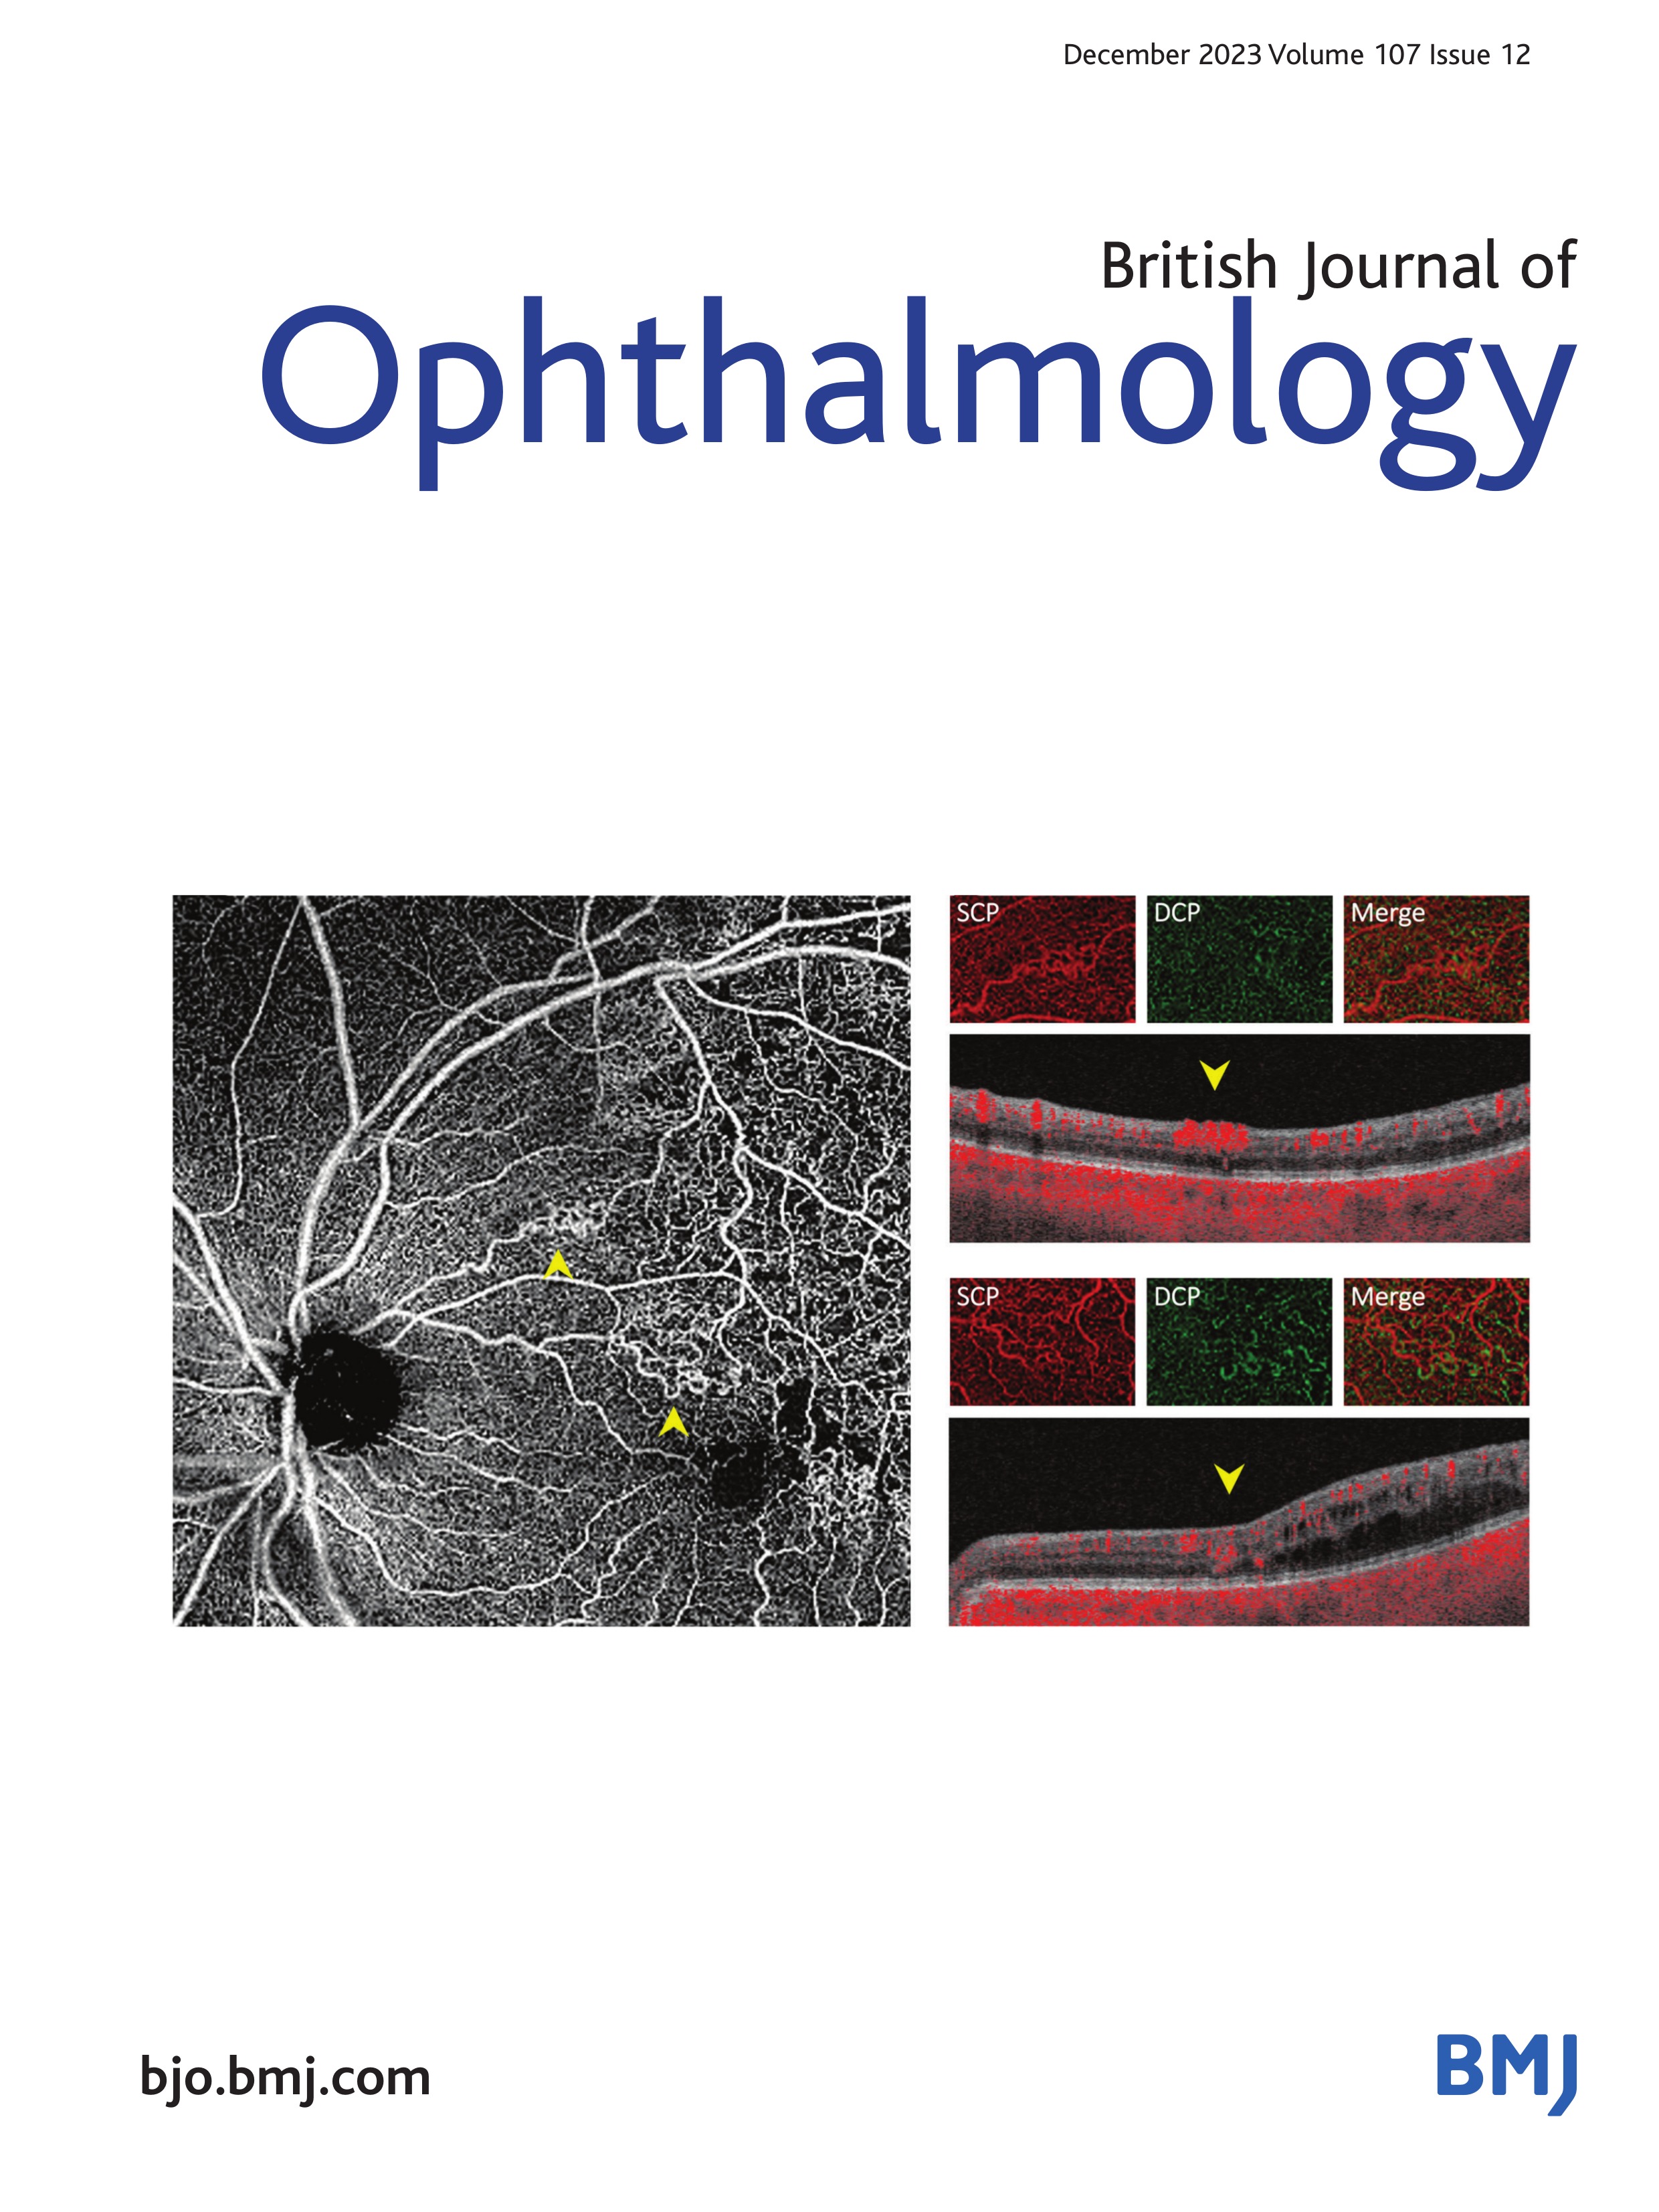 Formal registration of visual impairment in people with diabetic retinopathy significantly underestimates the scale of the problem: a retrospective cohort study at a tertiary care eye hospital service in the UK